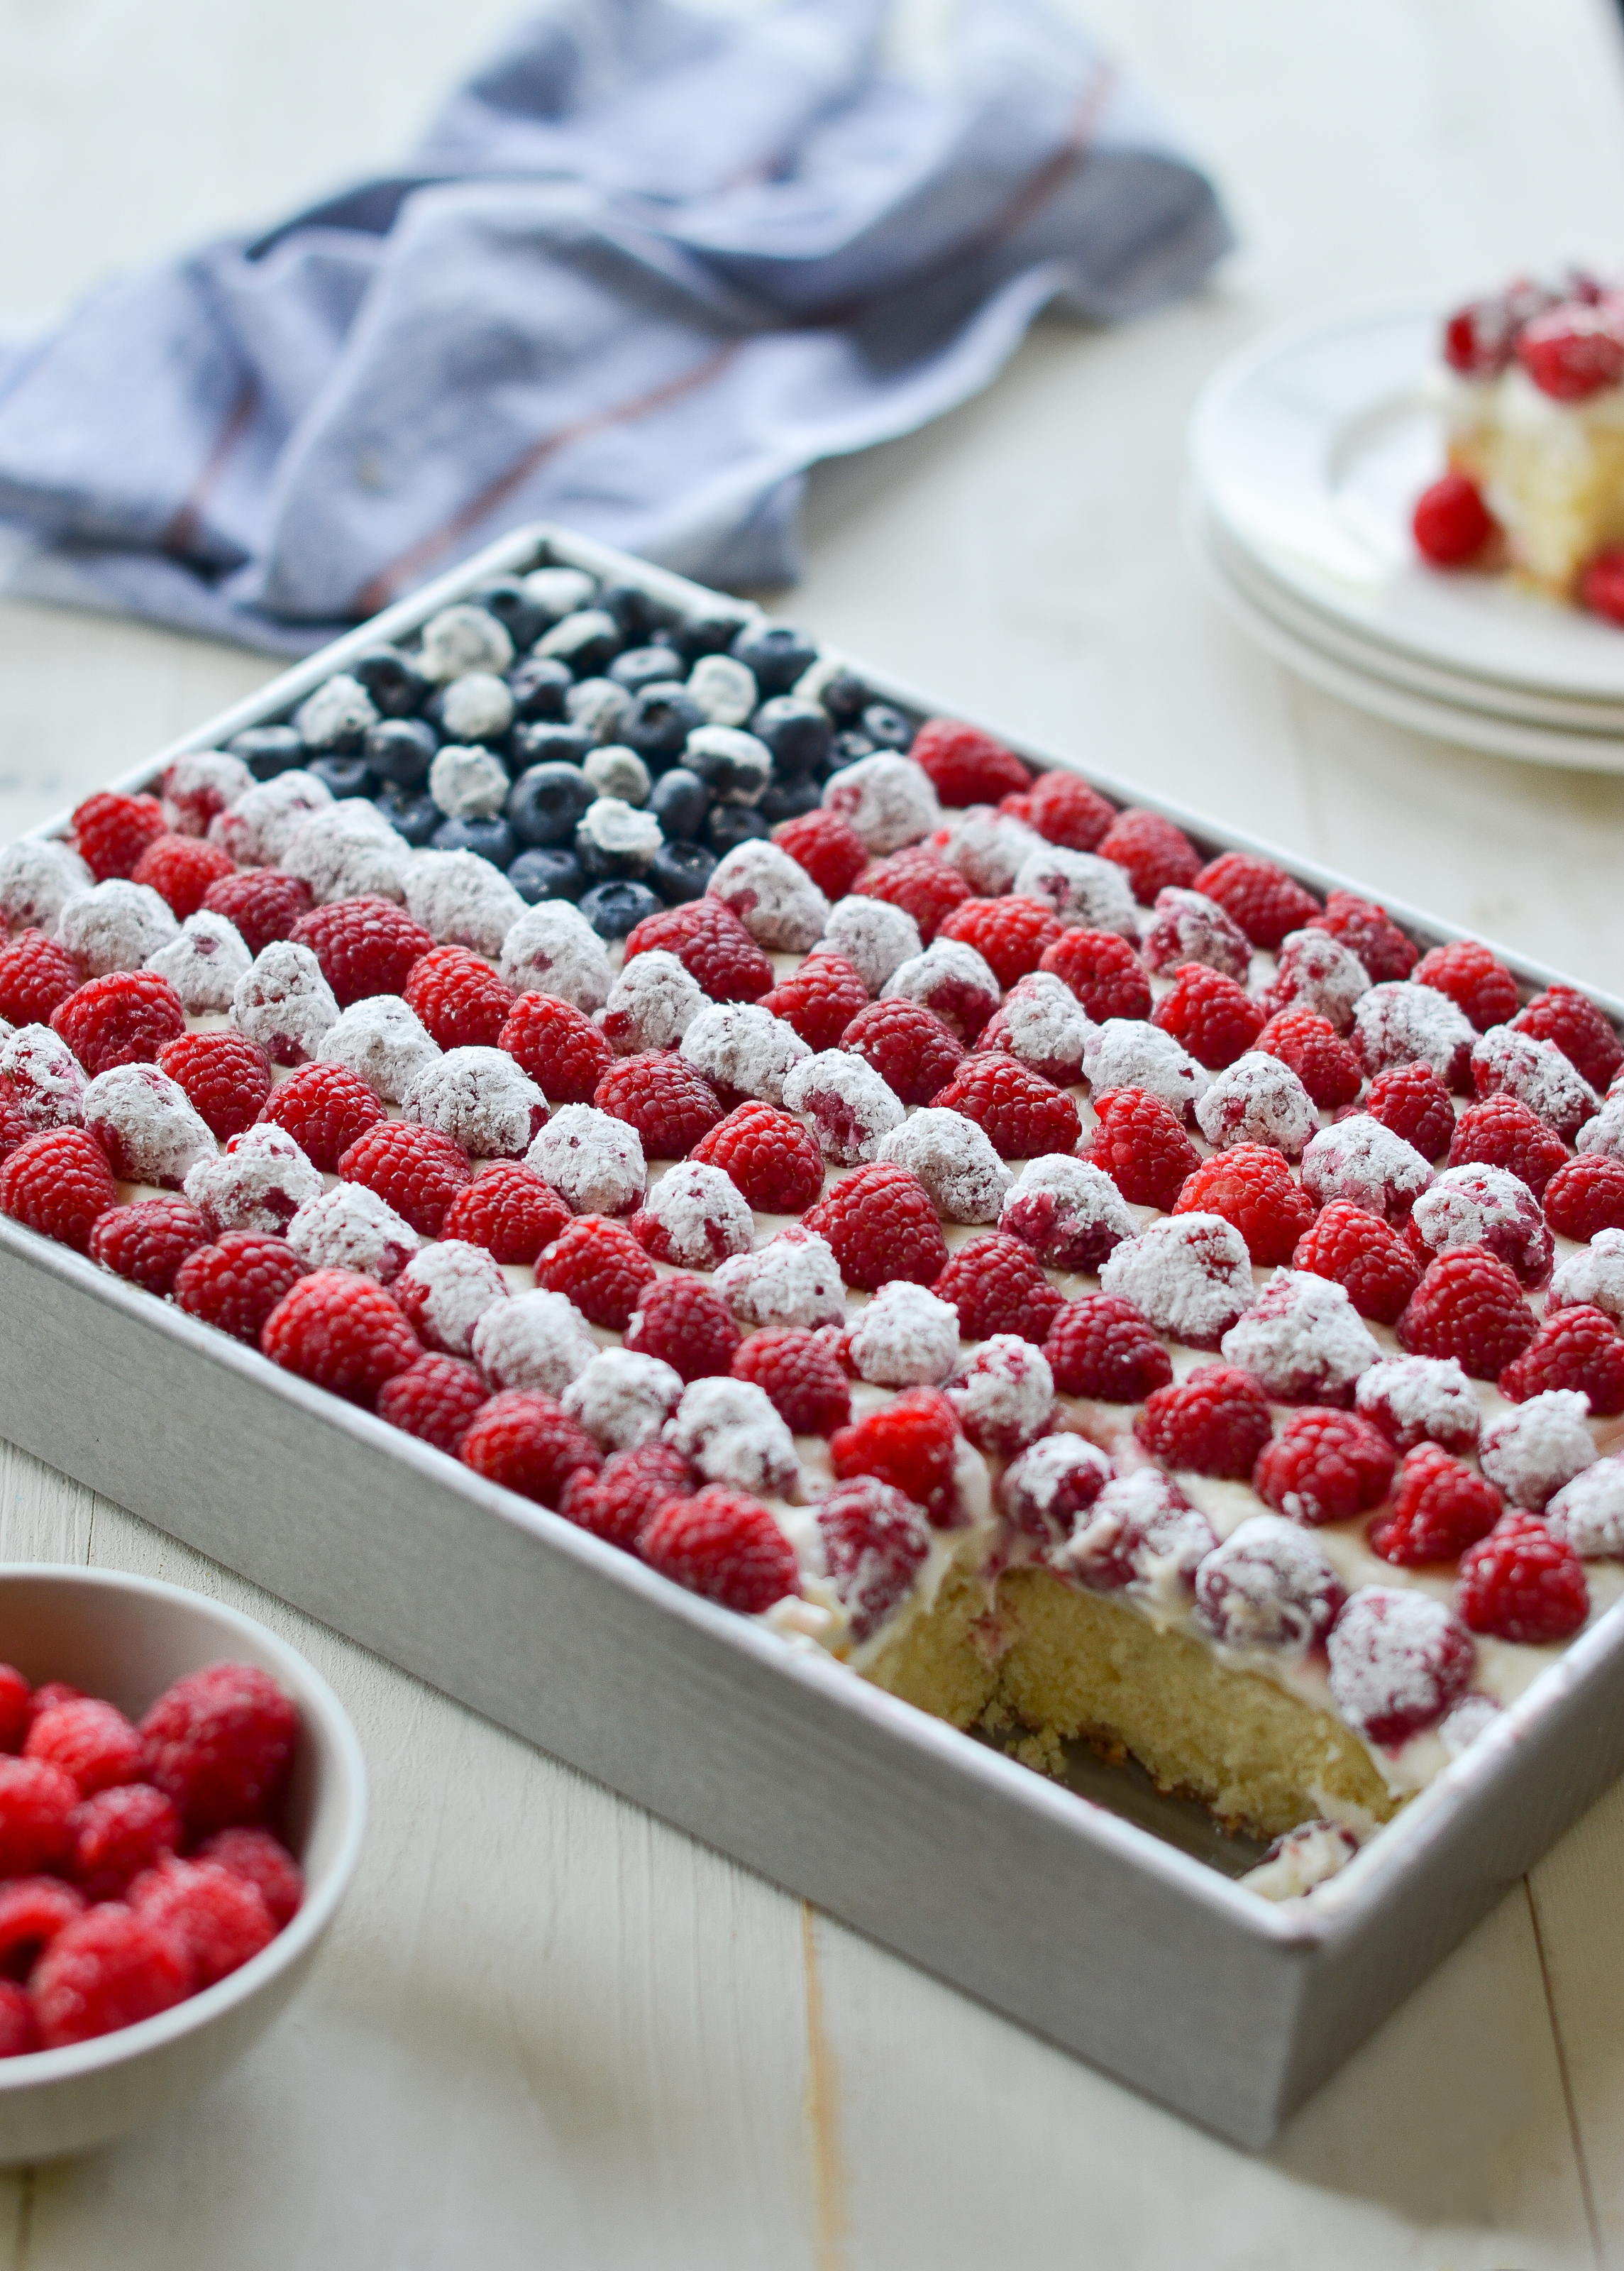 American flag cookie cake - easy 4th of July dessert